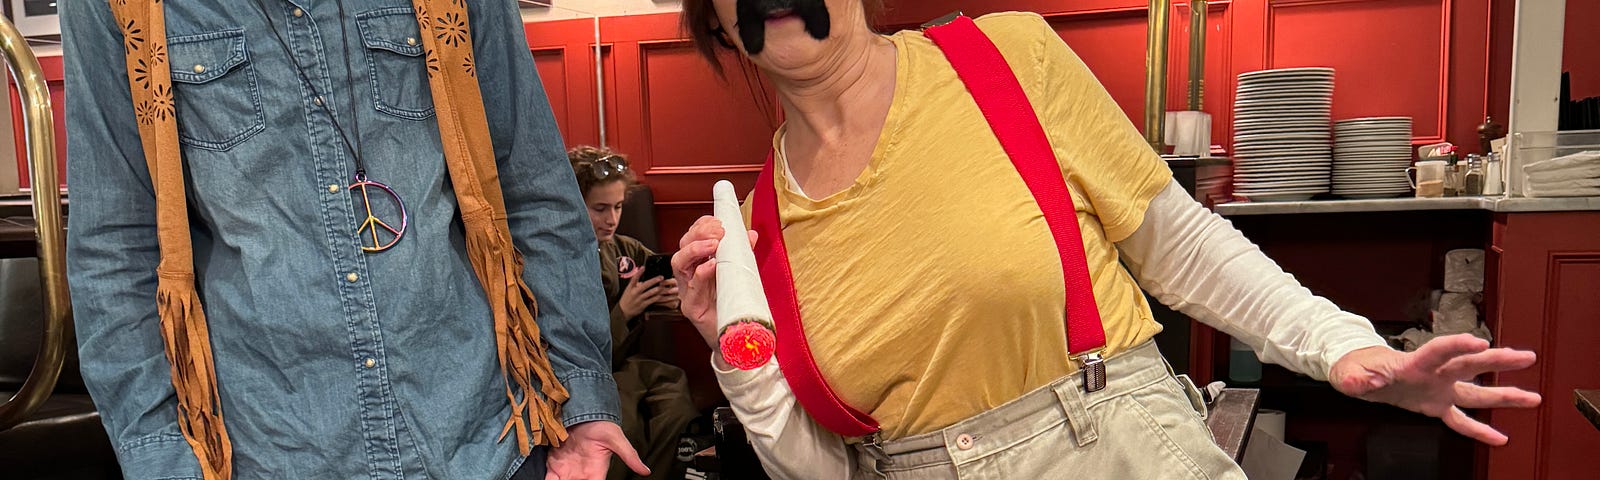 Woman in red suspenders wears a mustache. Young man, her son, to the left, looks on.